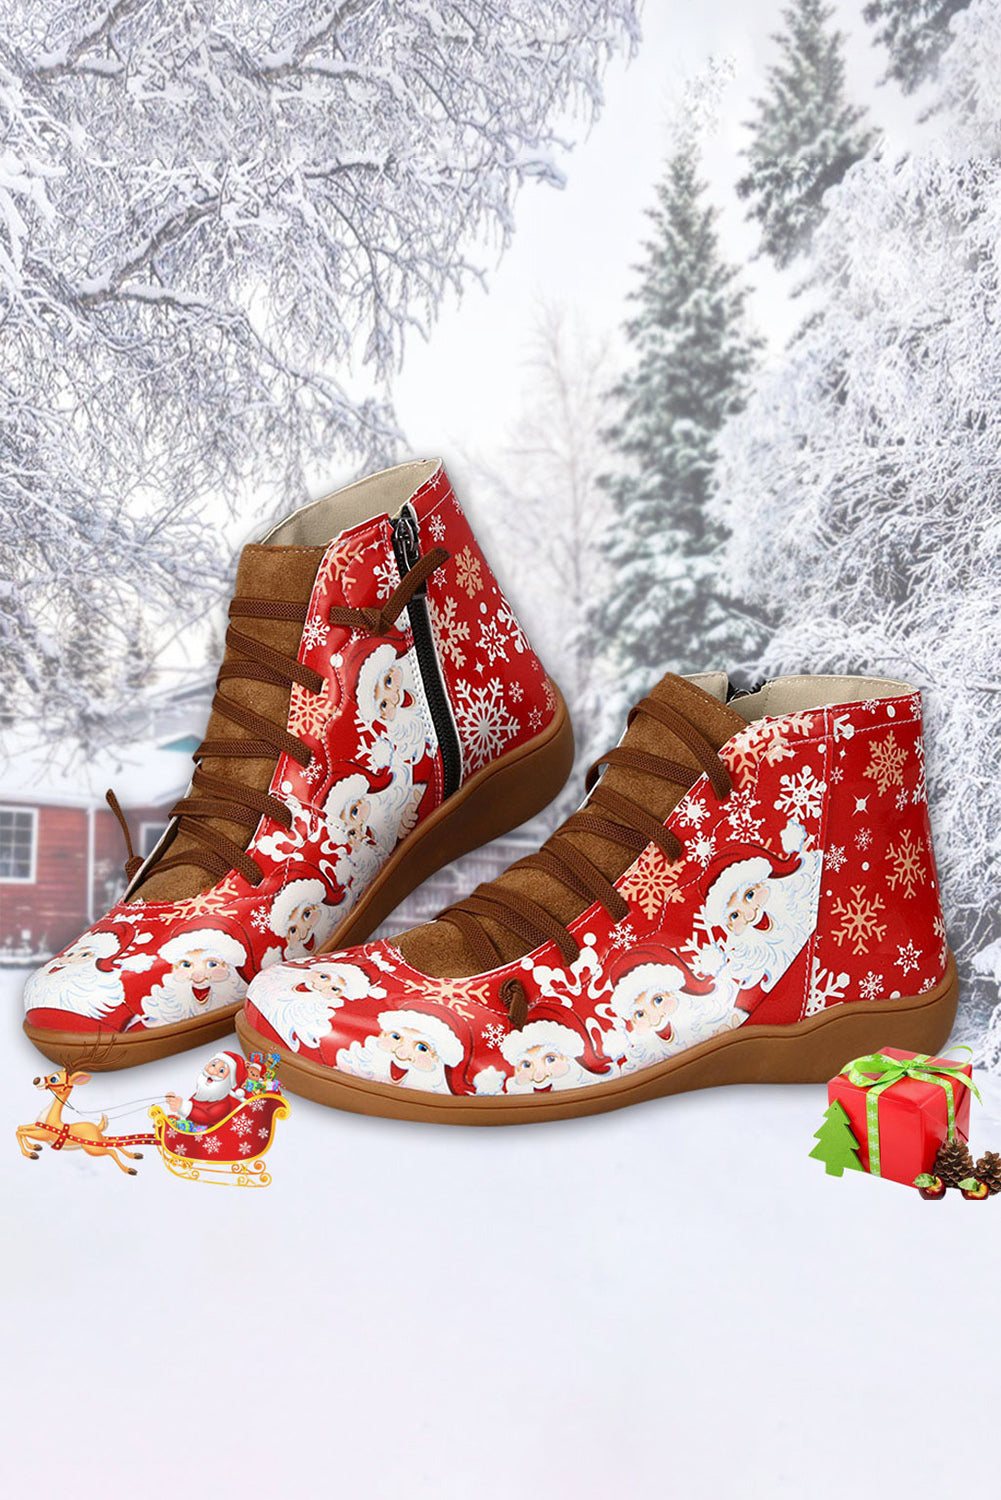 Christmas Ankle Boots Xmas Stanta Claus PU Leather Boots for Women